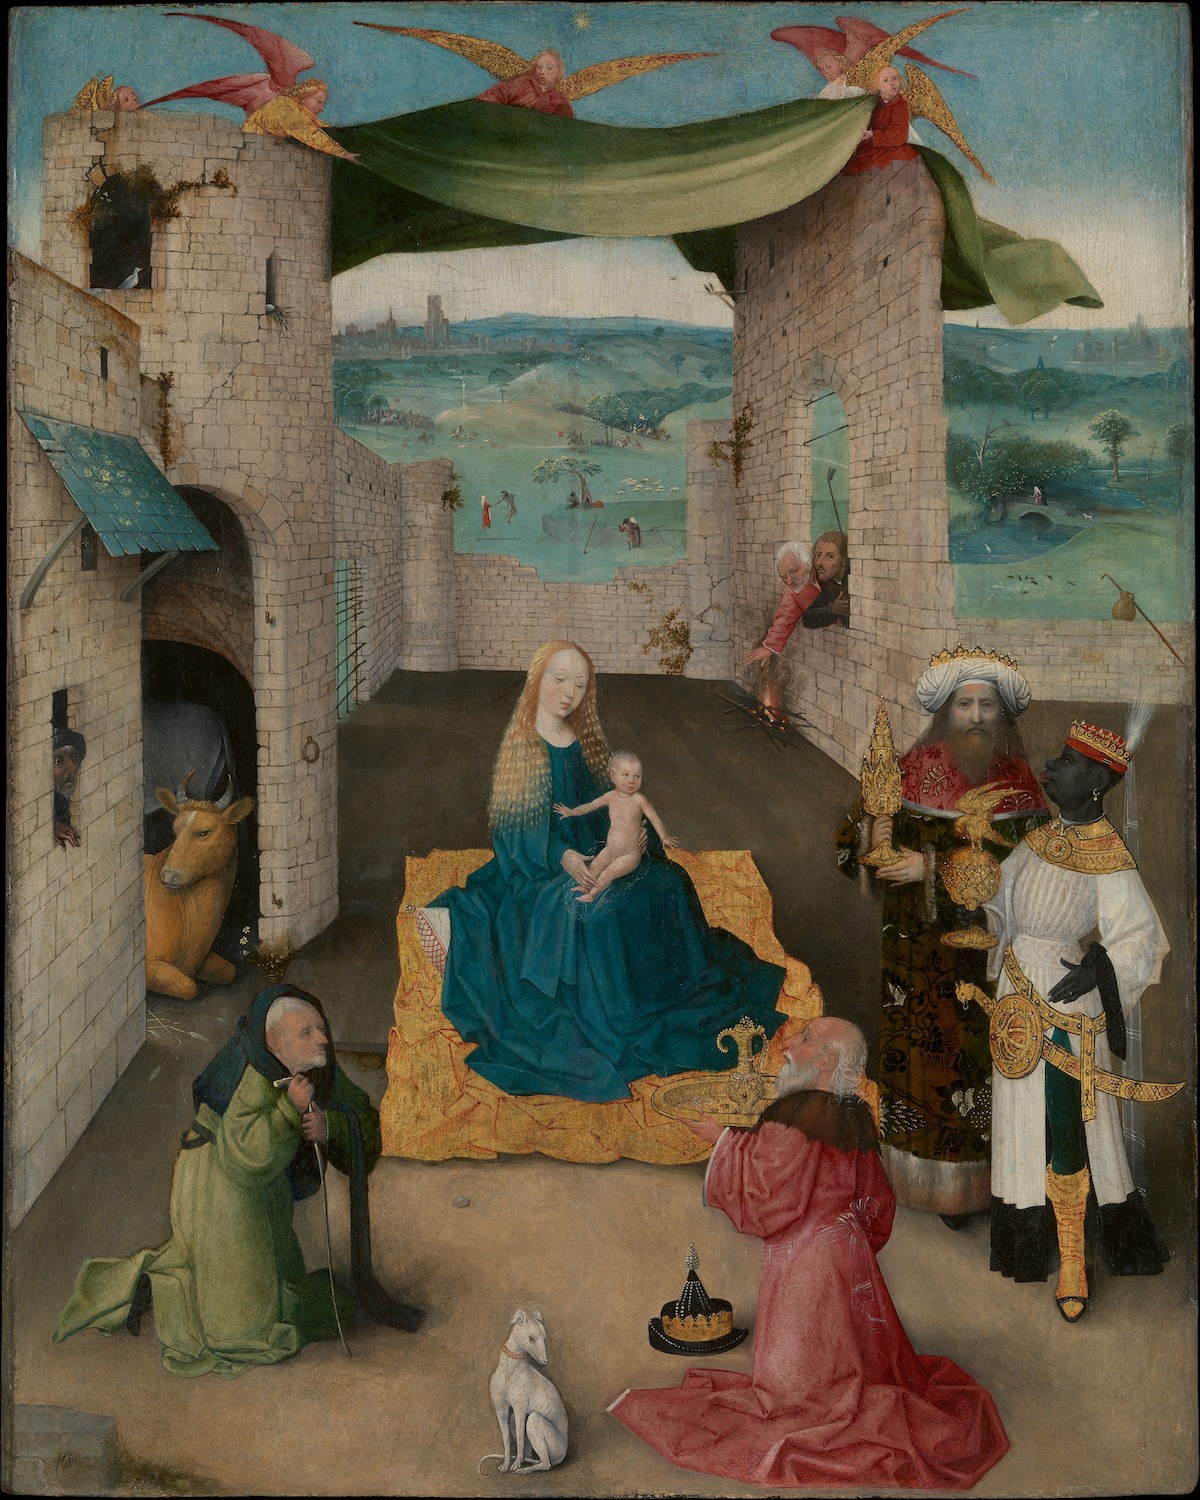 A white Virgin Mary with a baby in her lap seated amid a square of gold. Two white men kneel before her, and a Black king with a gold saber looks on. A dog, a cow, and other animals appear in the open-air structure, and angels bring down a green fabric.